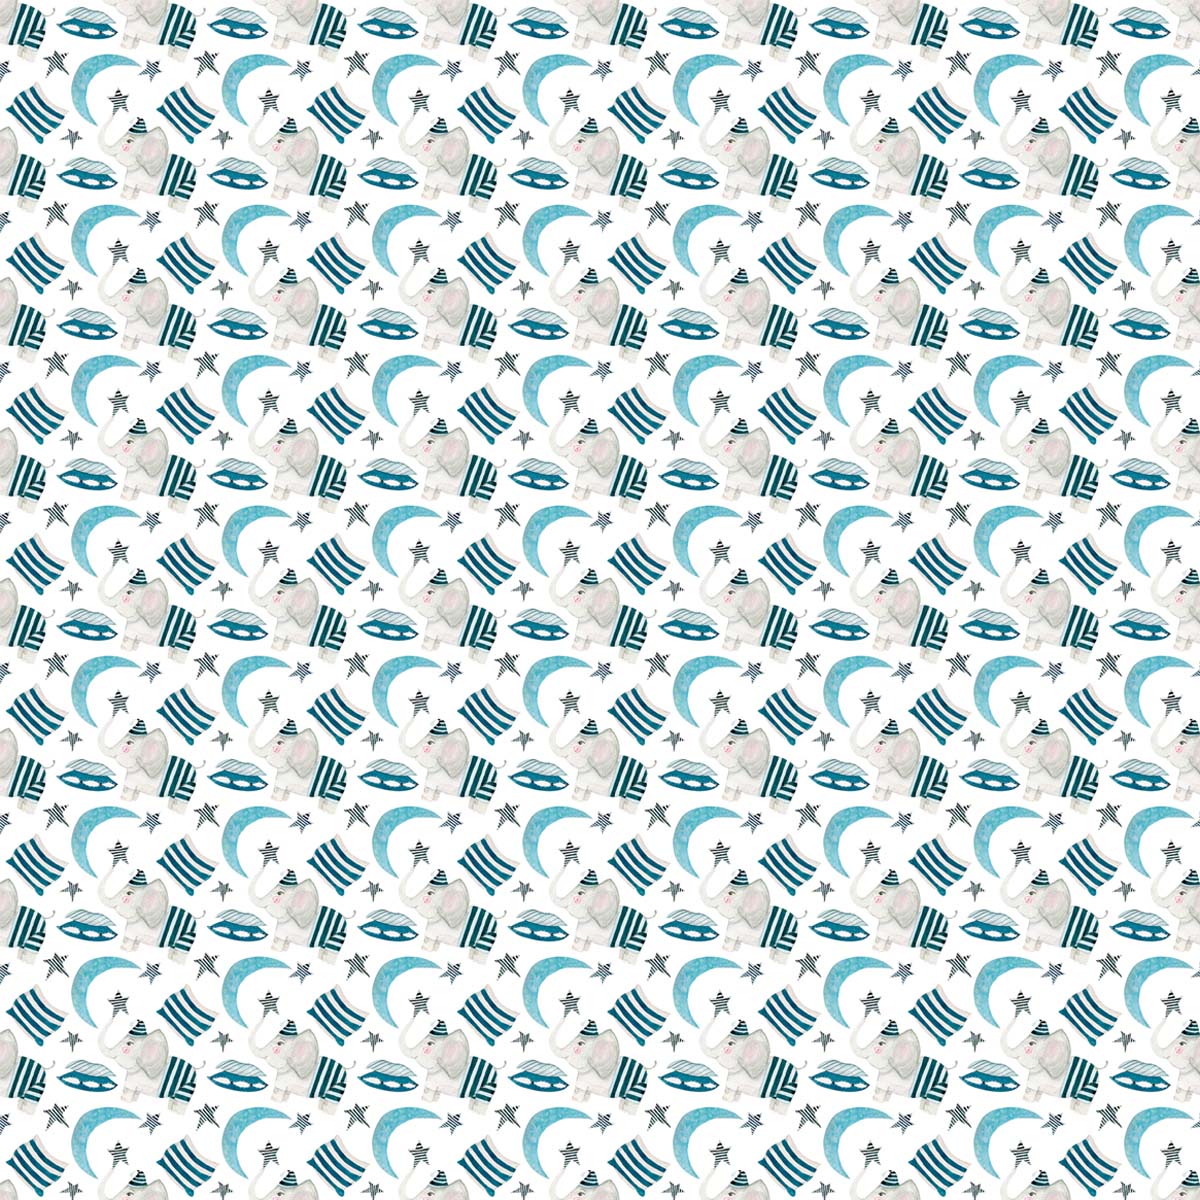 A pattern of watercolor elephants and stars